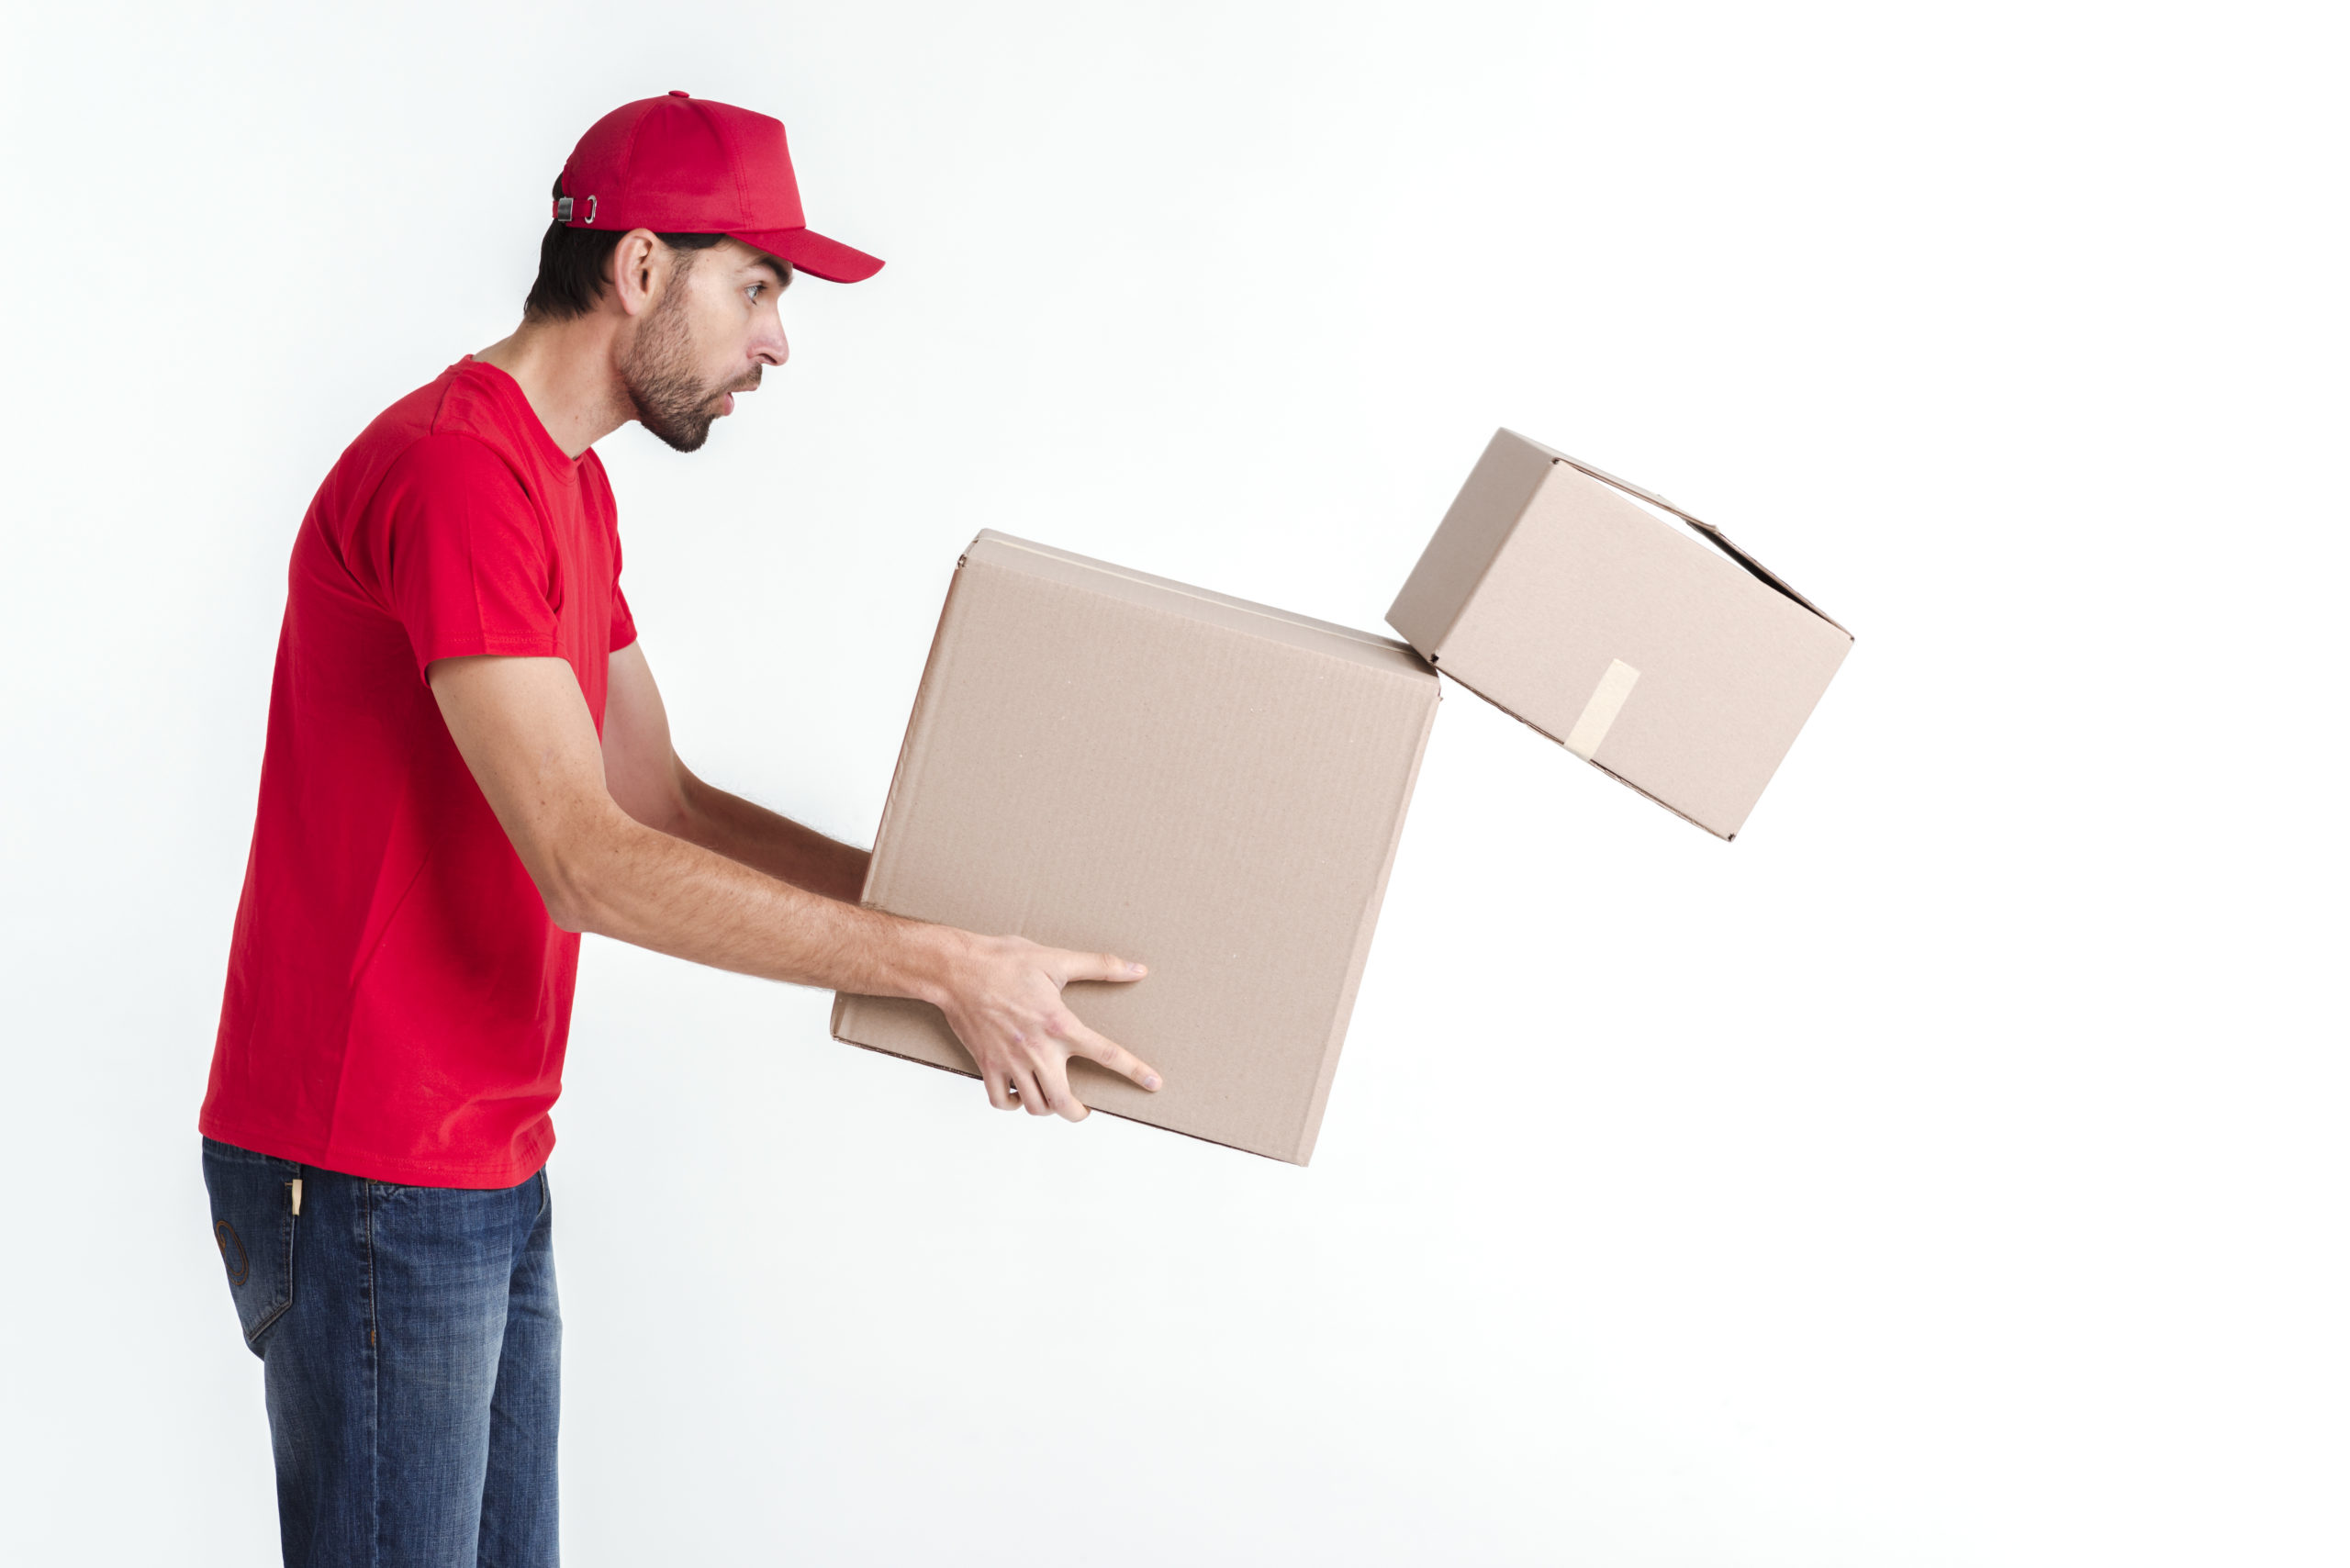 7 Reasons Why Drop Shipping Businesses Fail